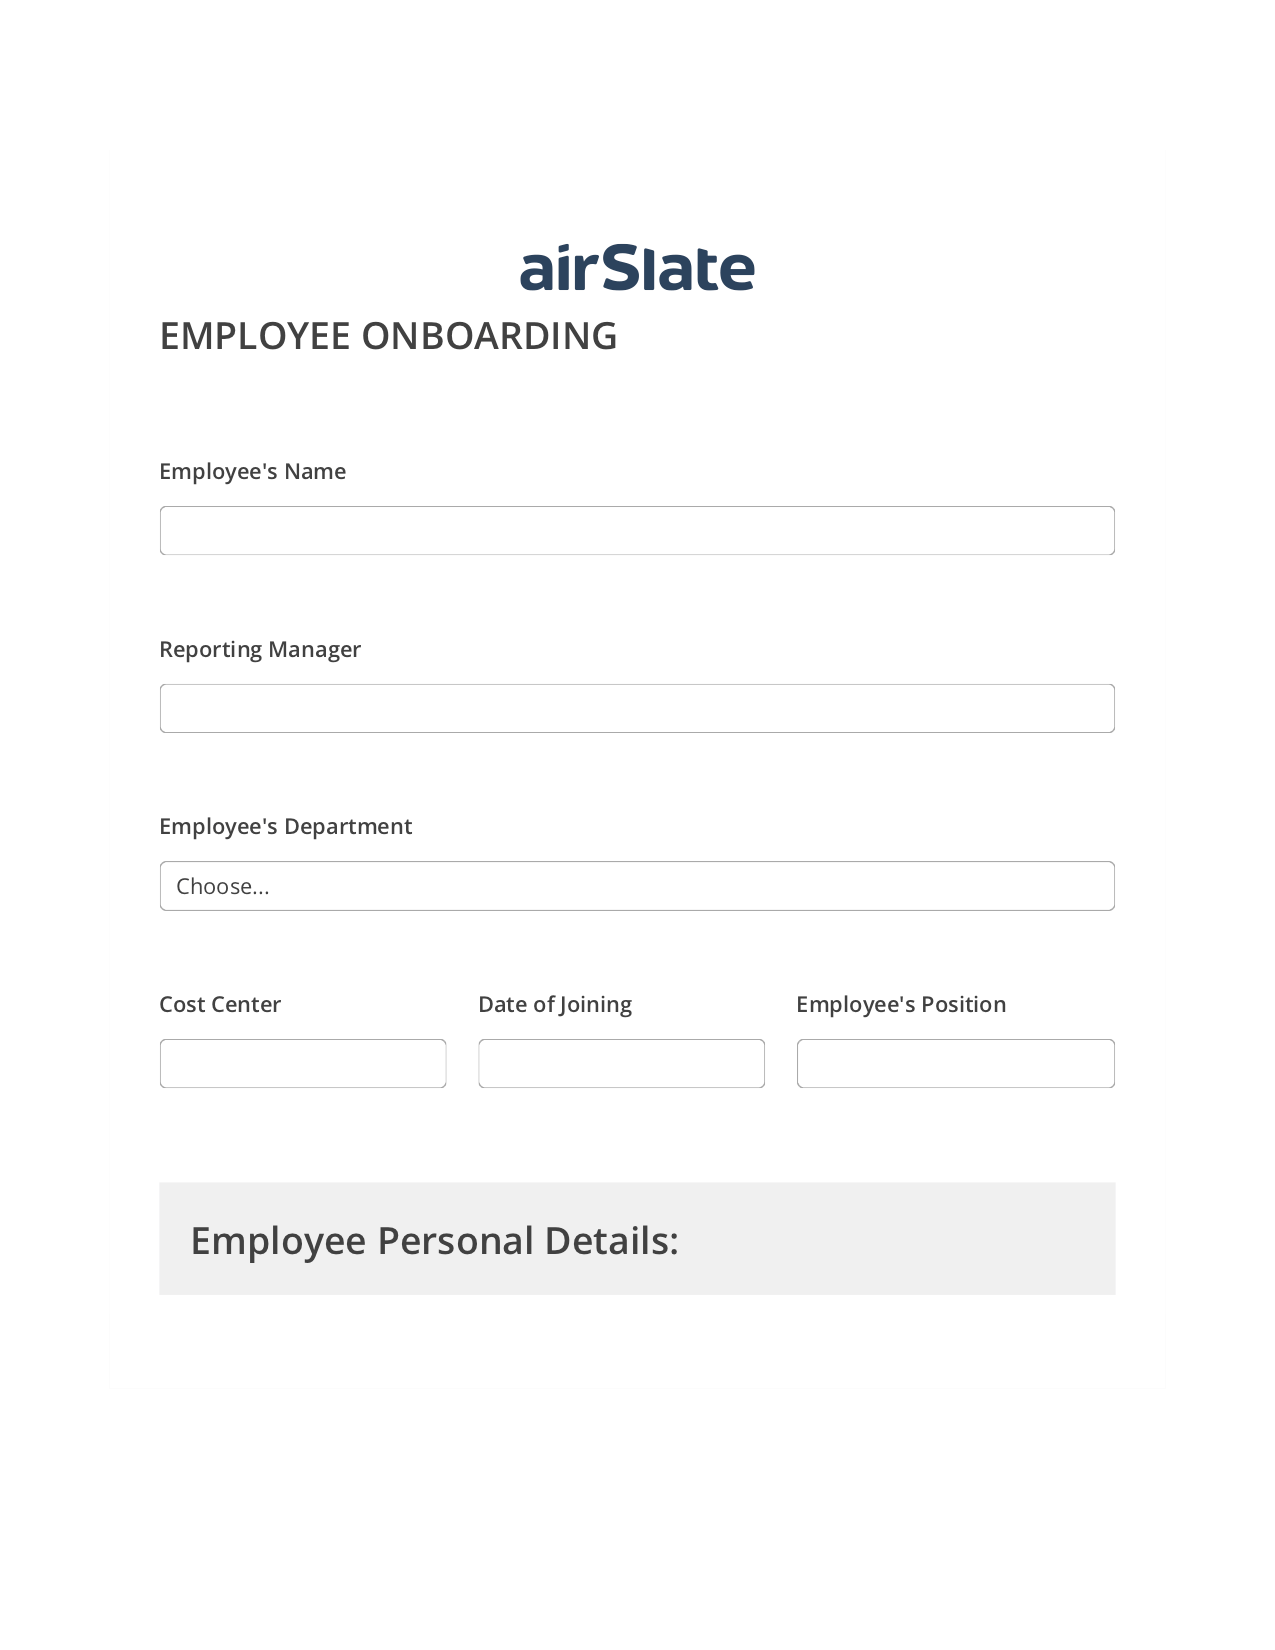 Employee Onboarding Workflow Pre-fill from Excel Spreadsheet Bot, Remove Slate Bot, Post-finish Document Bot